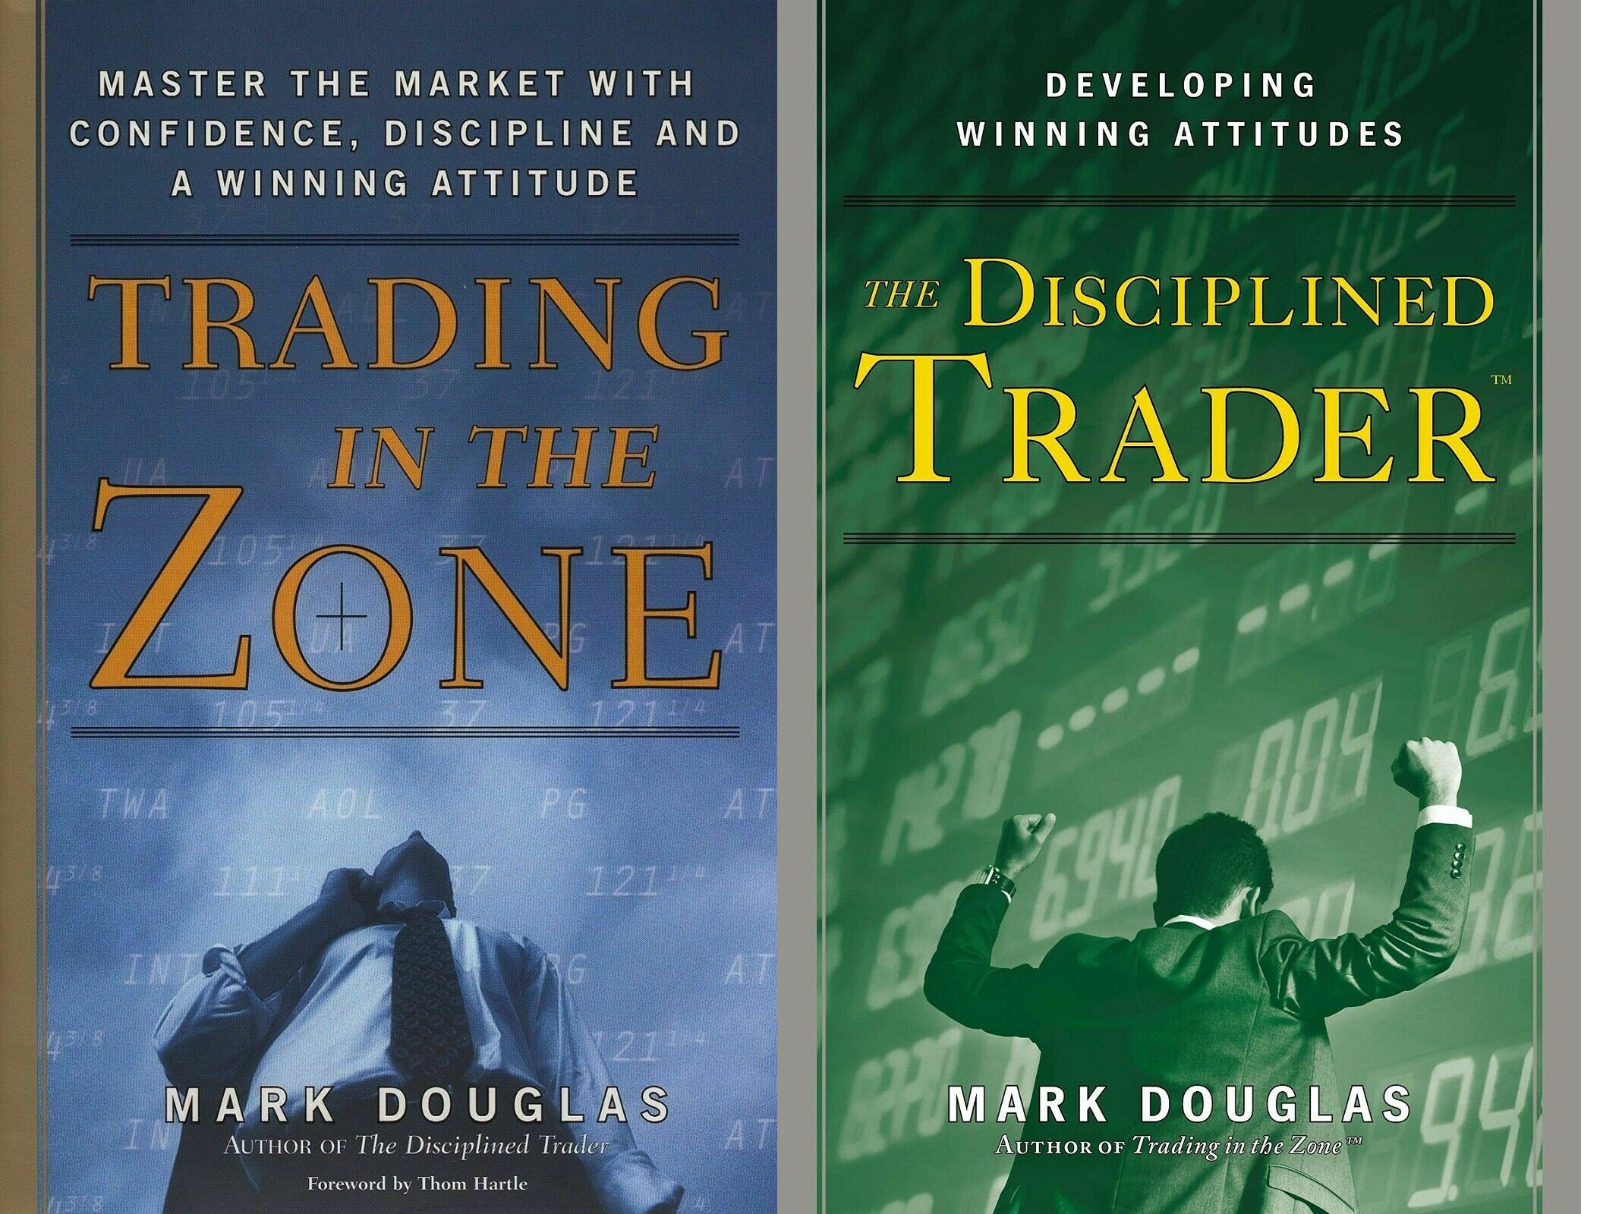 Trading in the Zone and The Disciplined Trader (PAPERBACK) by Mark Douglas